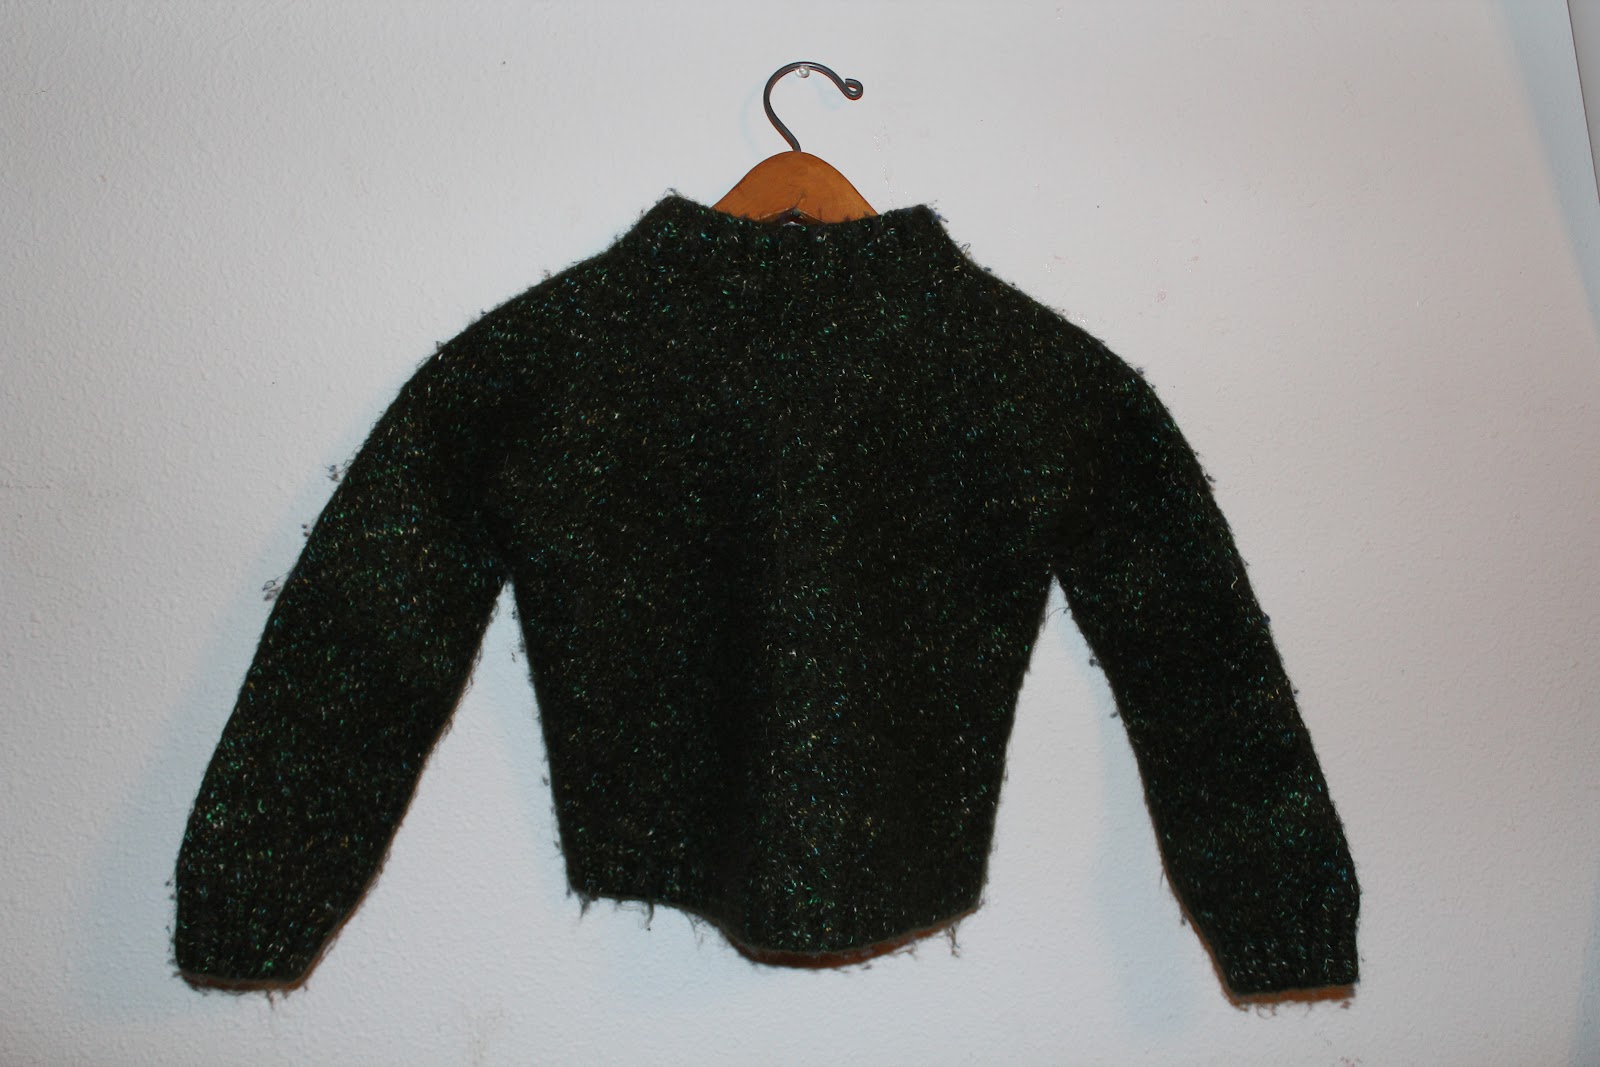 My Life on the Divide: How to Felt Wool Sweaters